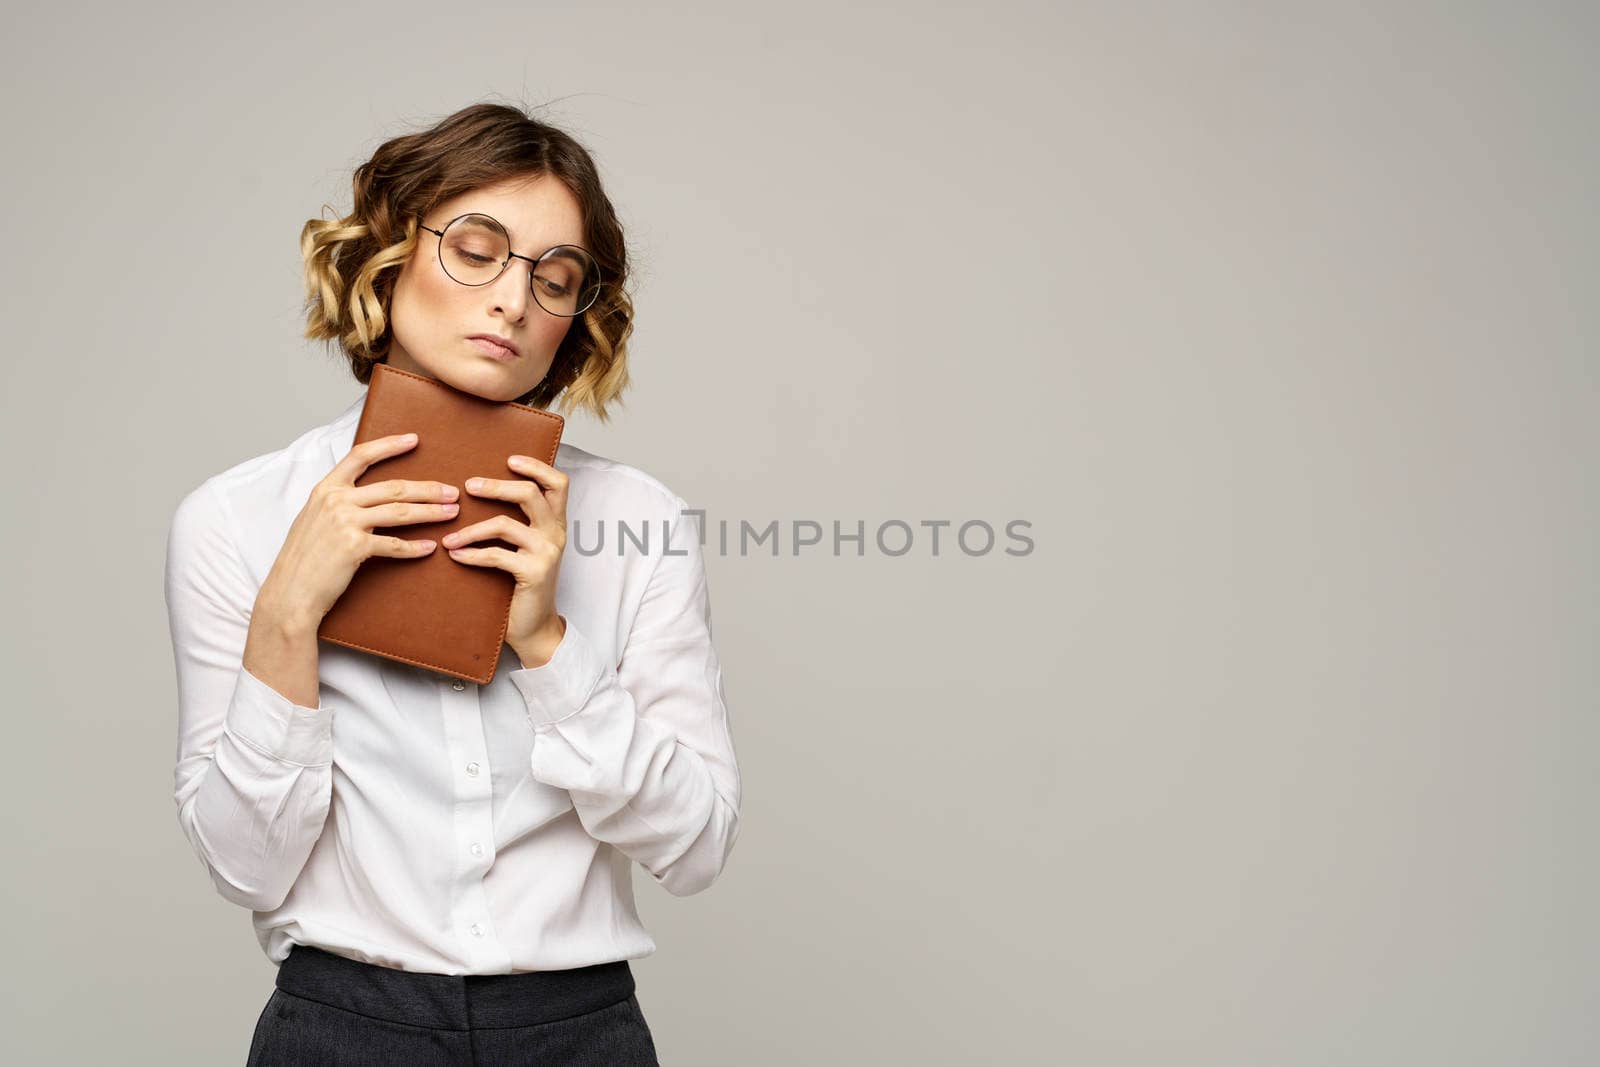 Business woman with notepad and glasses on a light background hairstyle success emotions. High quality photo